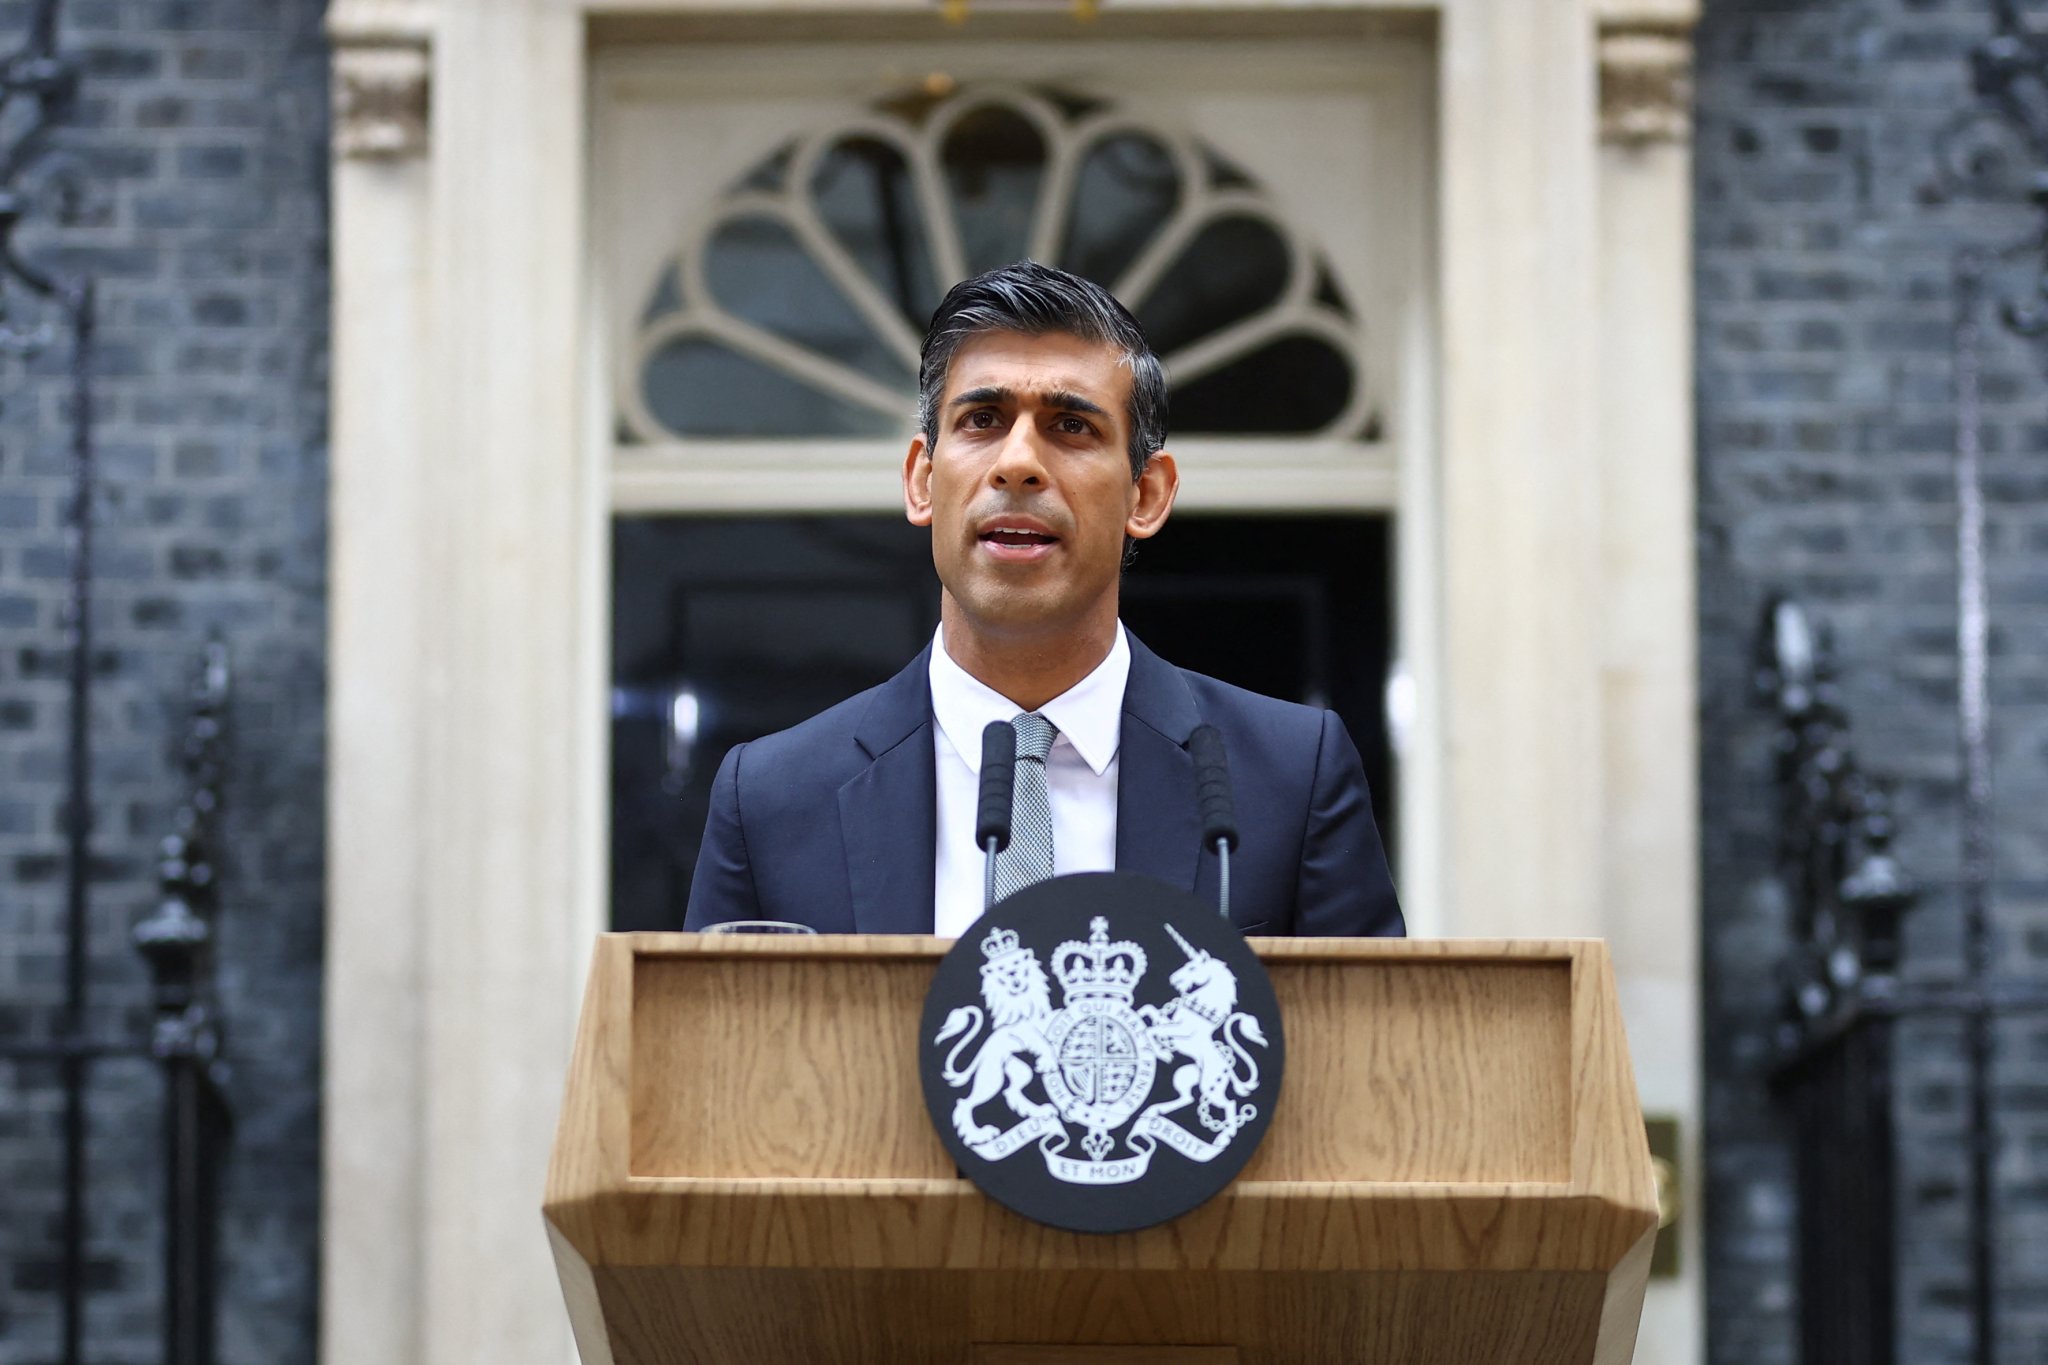 Rishi Sunak opted for continuity in his speech and cabinet appointments